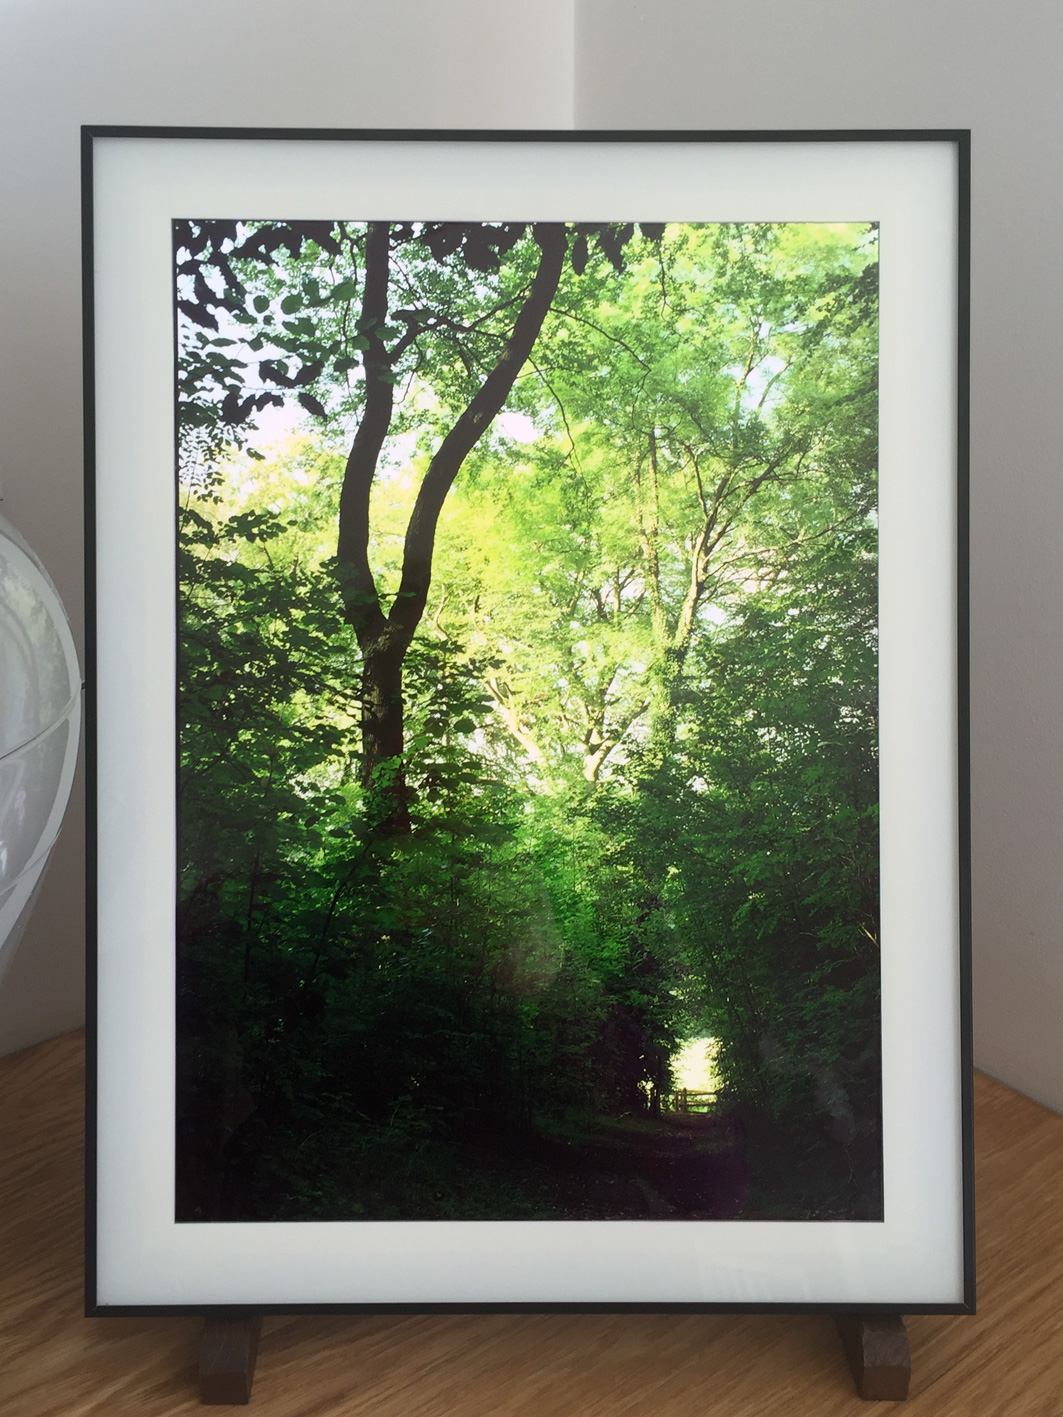 'In the Forest' series mock-up Lightbox for discussion